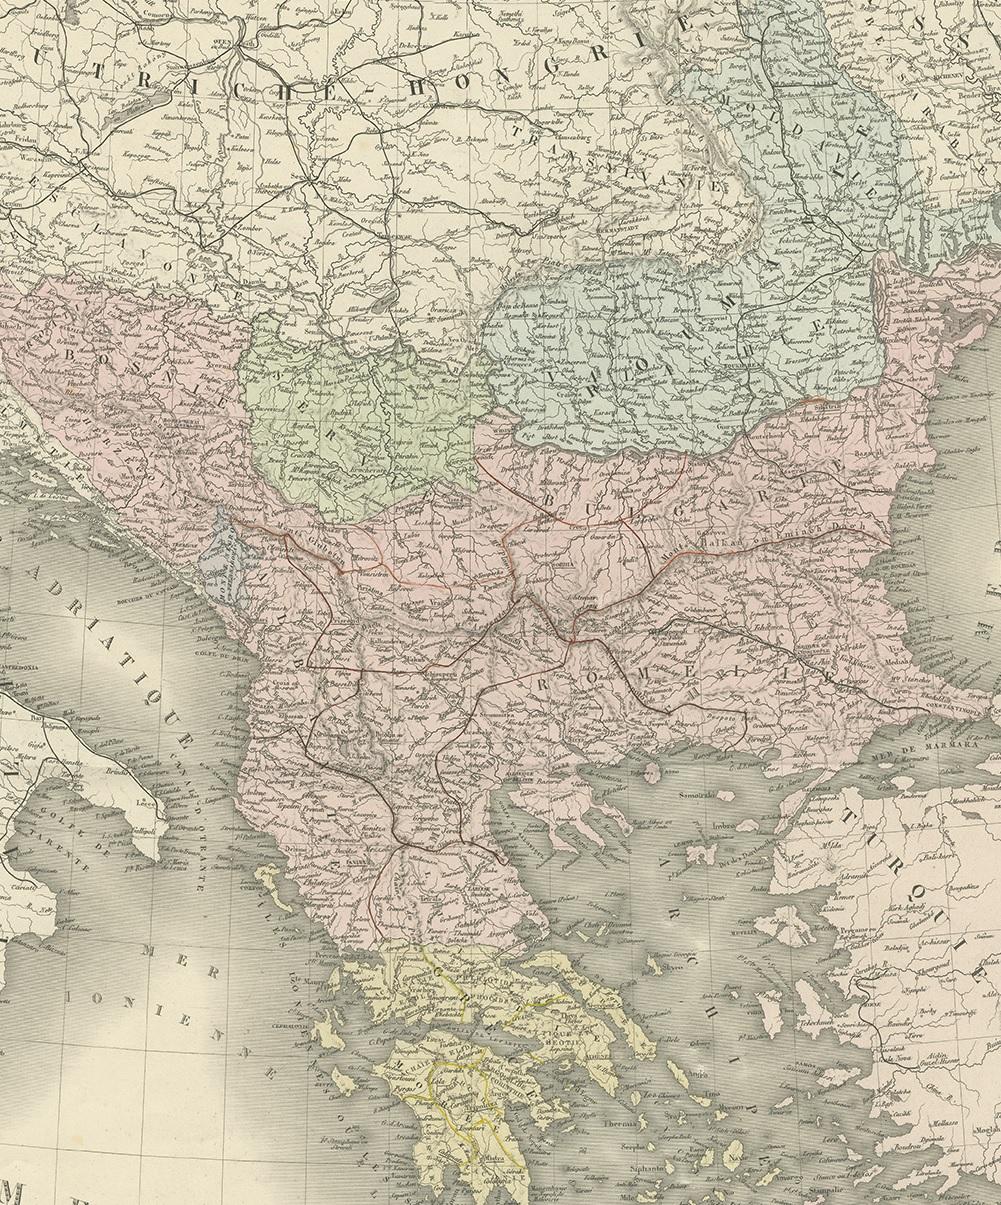 map of europe 1875